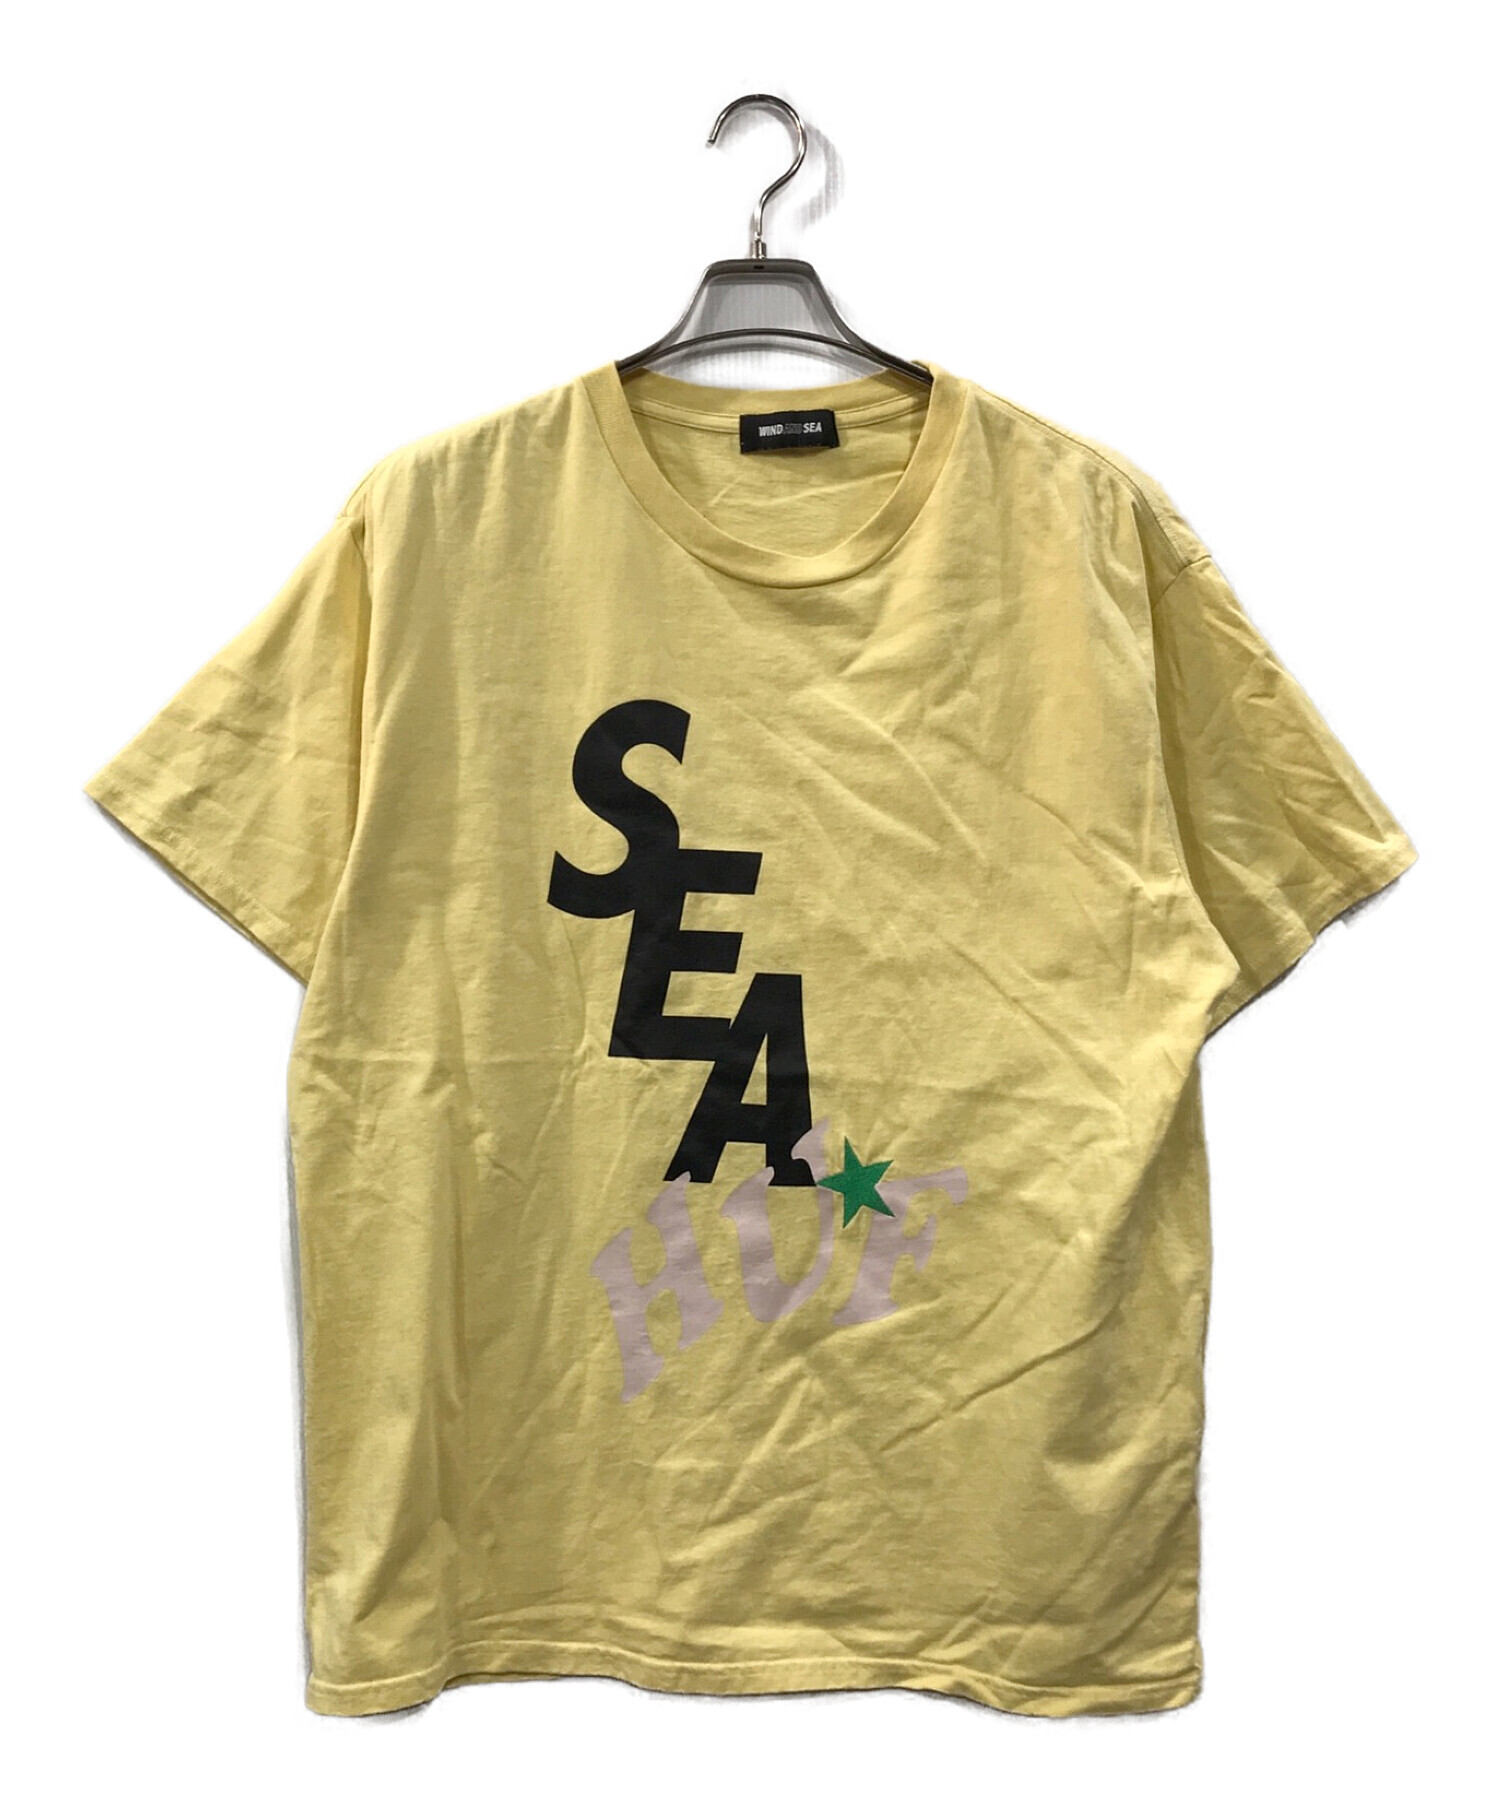 WIND AND SEA S/S T-SHIRT WDS-SEA-21S-01 - Tシャツ/カットソー(半袖 ...